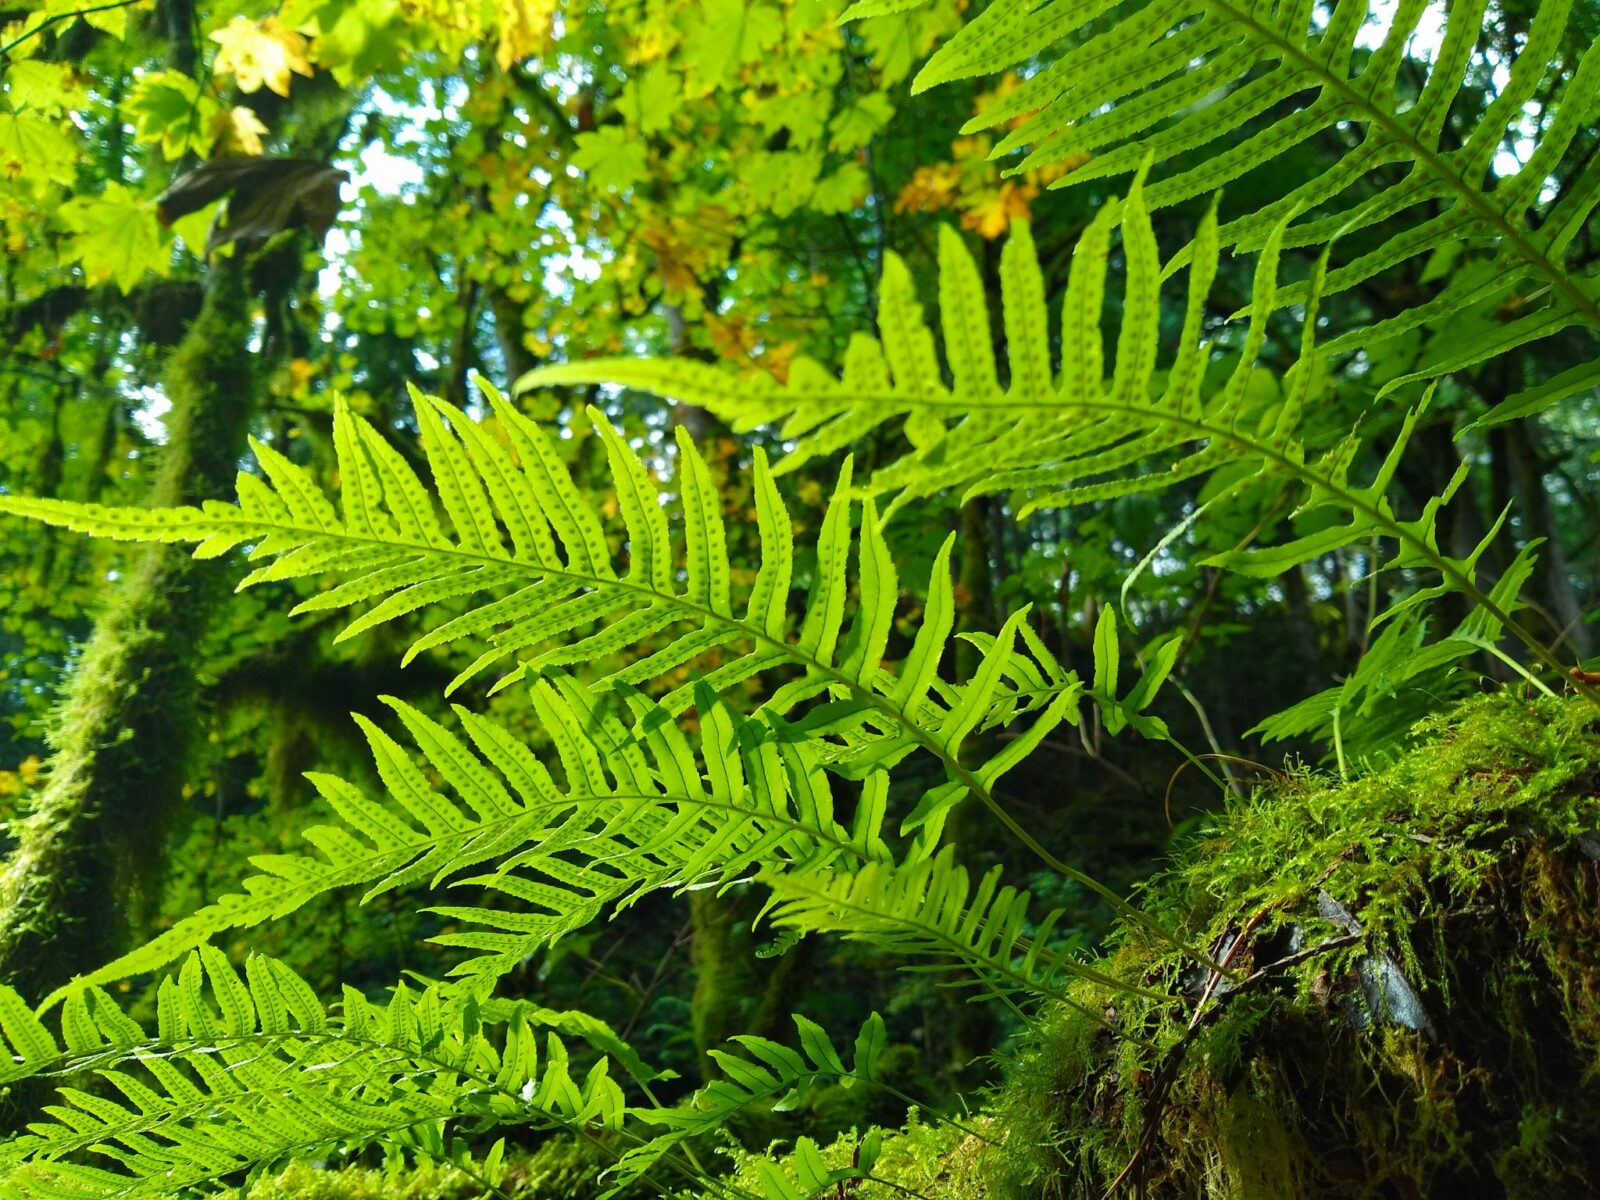 A close up of the bottom of bright green ferns and moss in the forest.